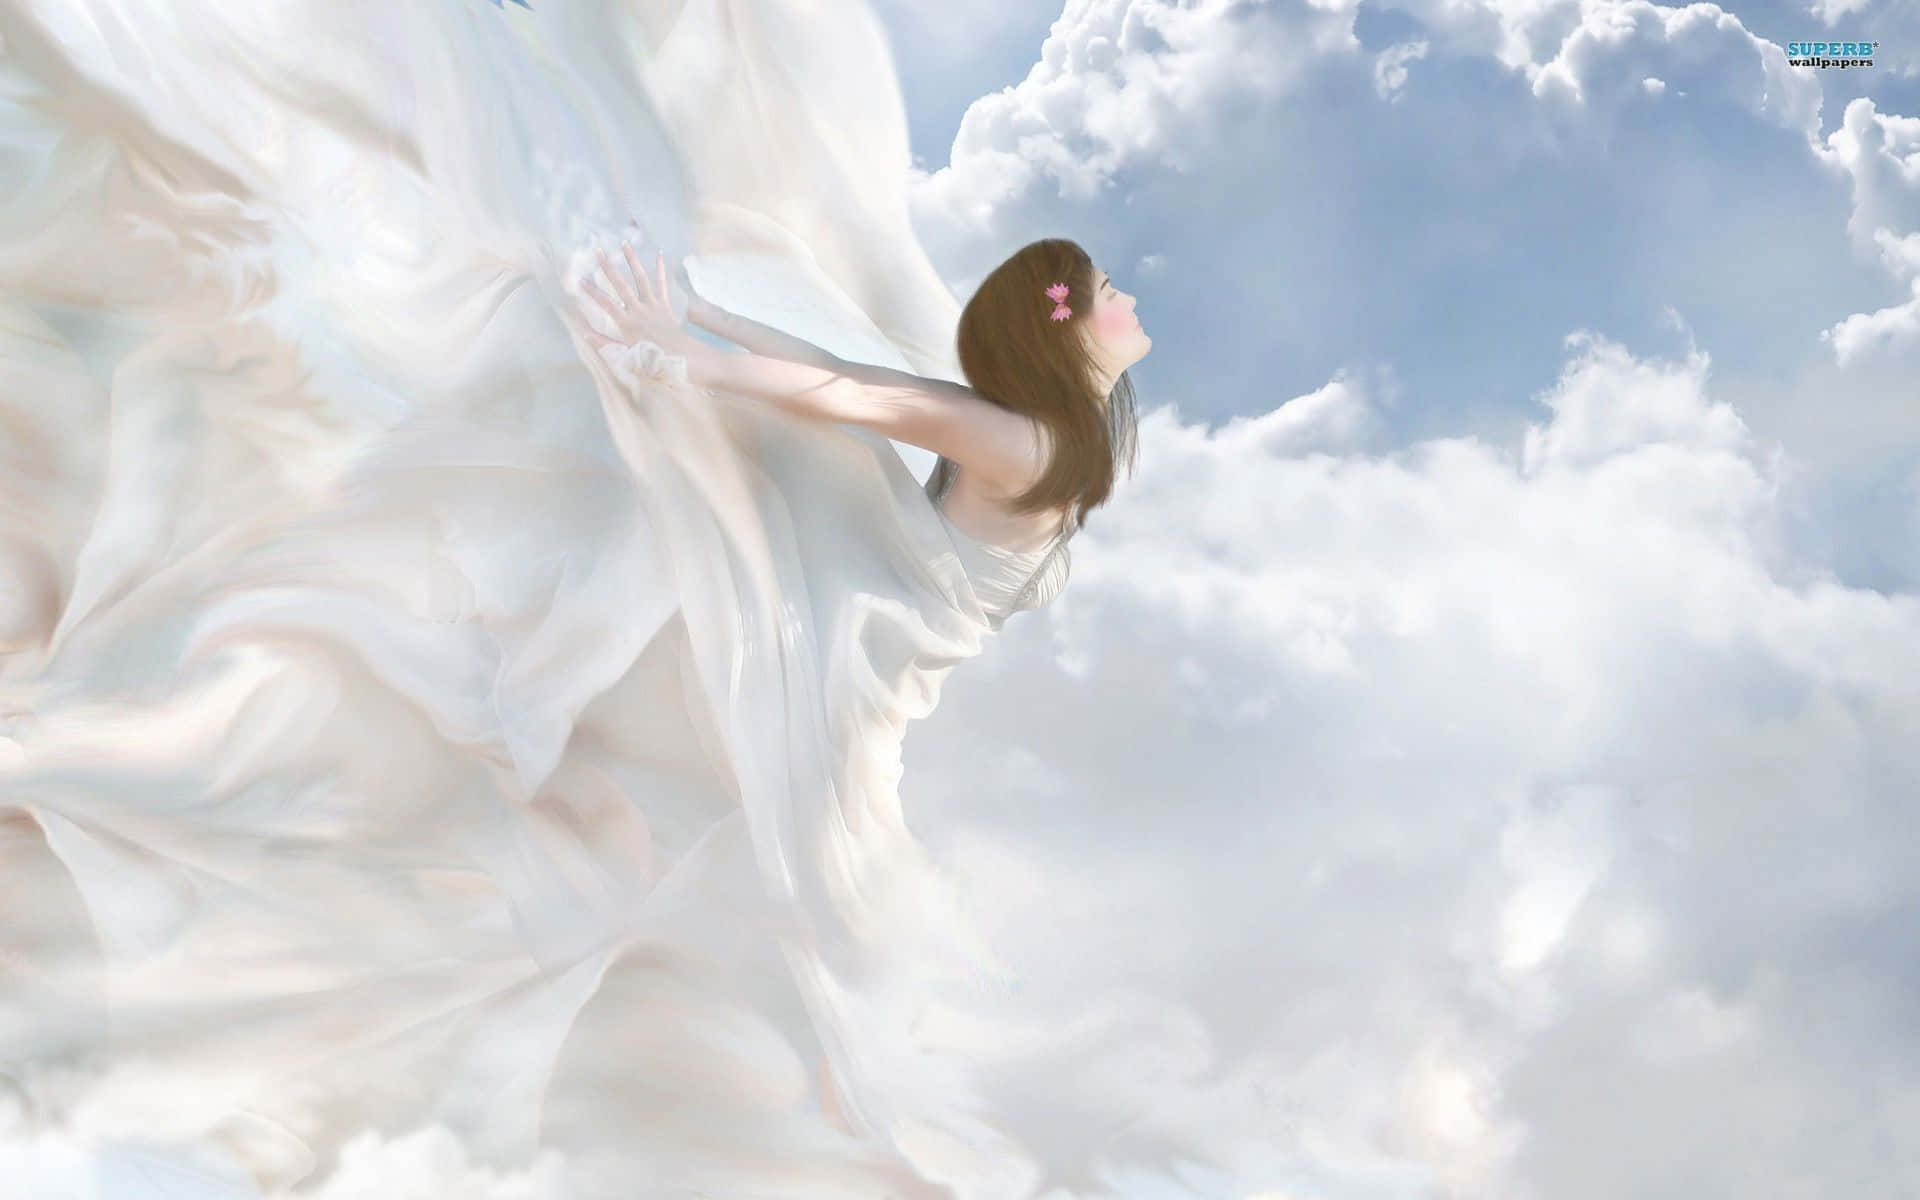 A divine angel looks over a dreamy sky of clouds Wallpaper